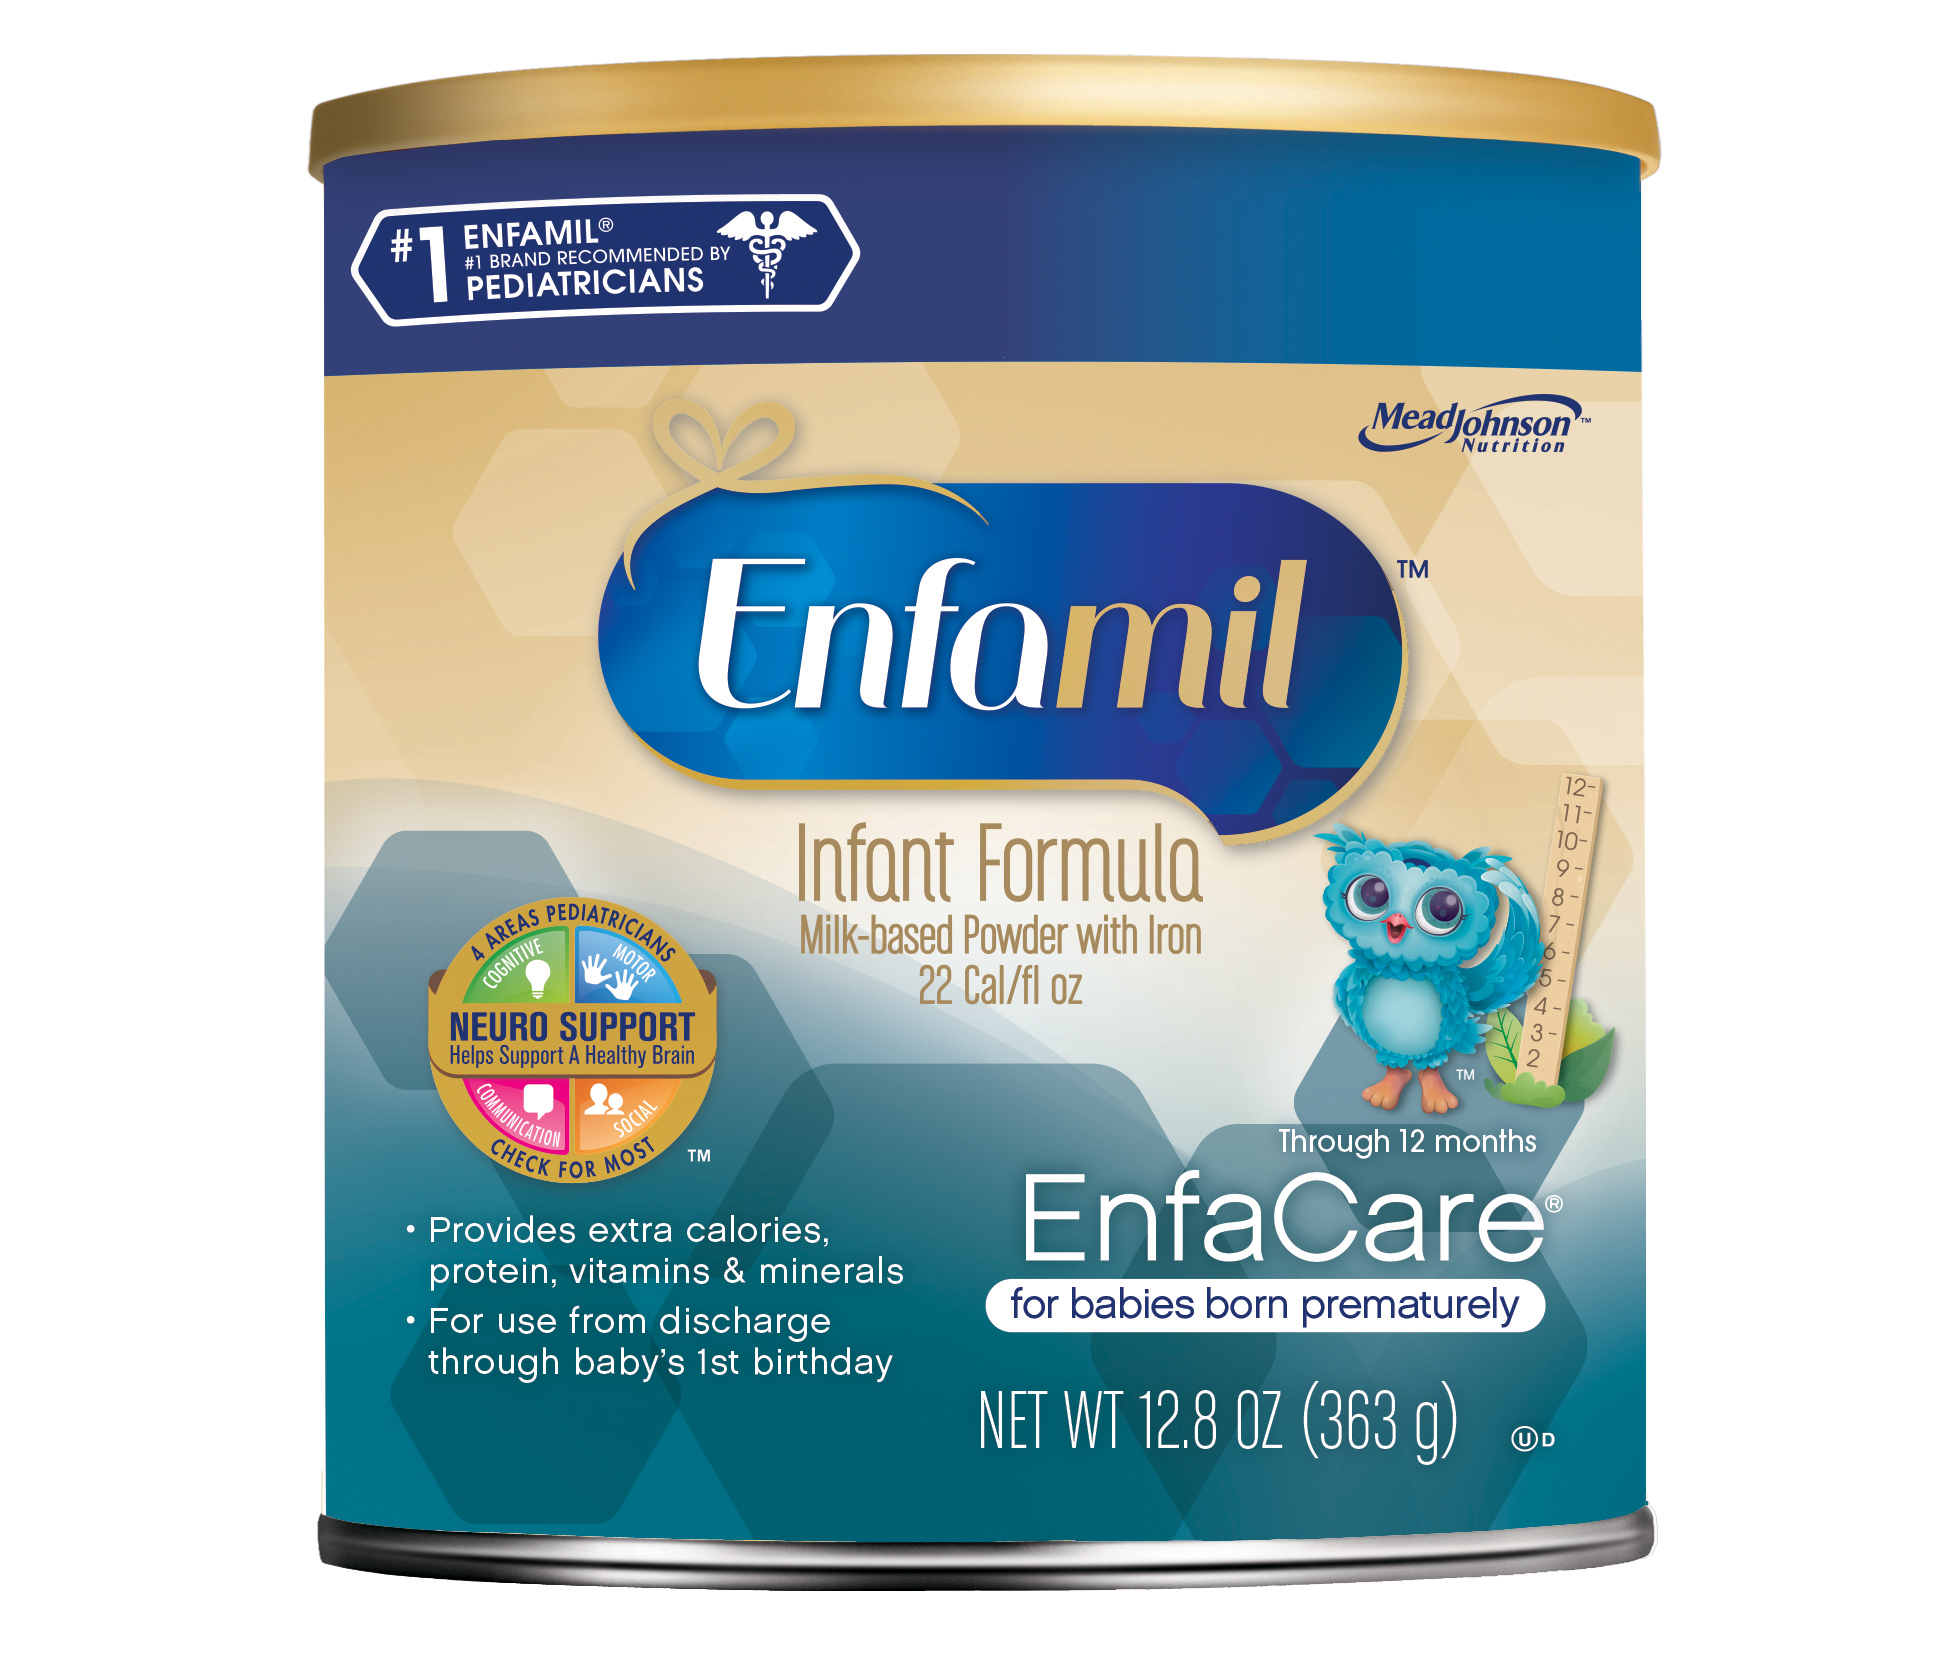 where can i get enfamil samples